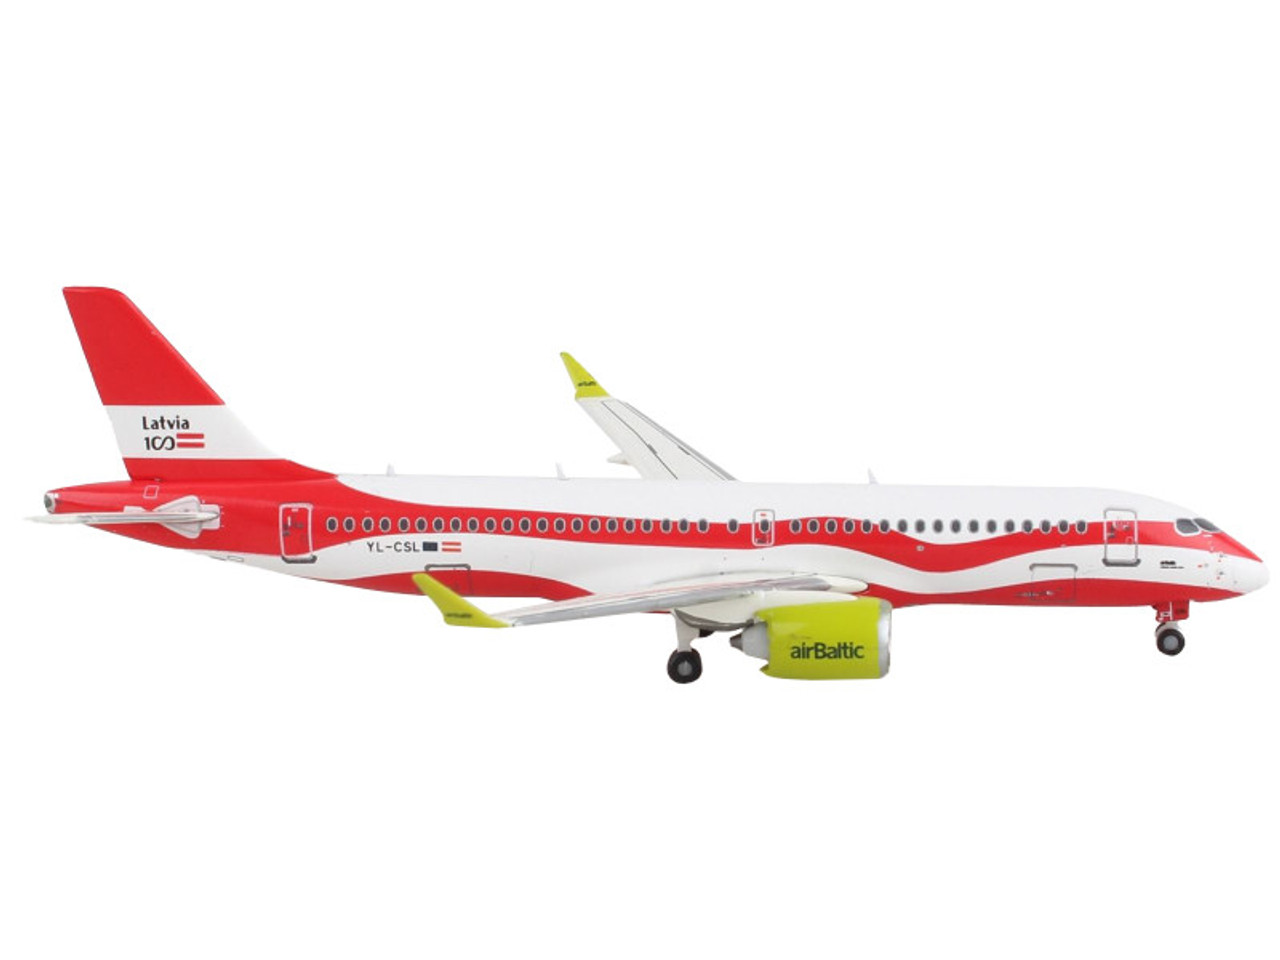 Airbus A220-300 Commercial Aircraft "Air Baltic" White and Red 1/400 Diecast Model Airplane by GeminiJets